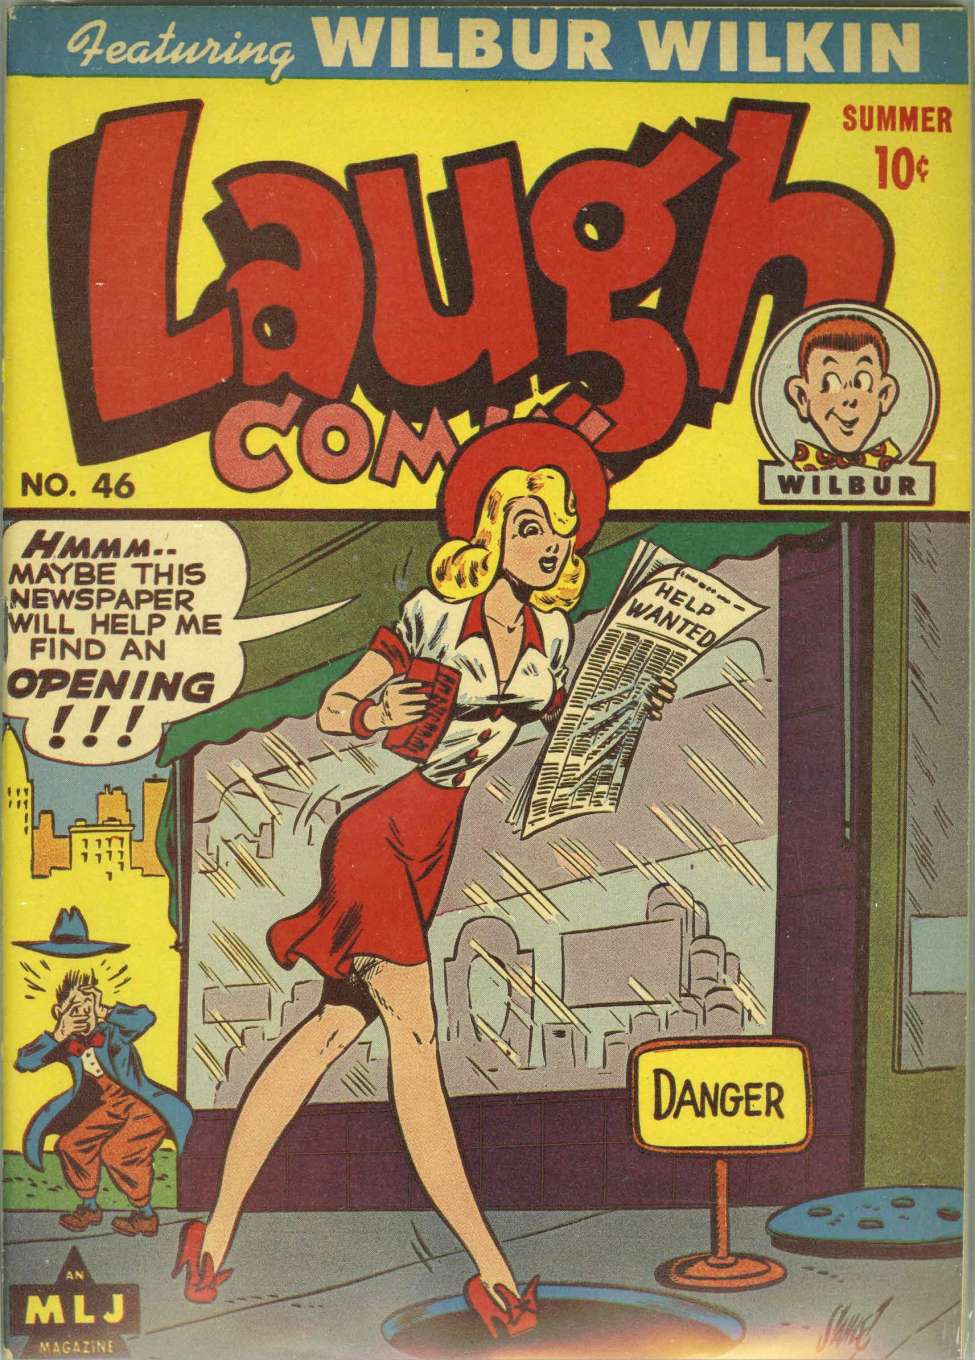 Book Cover For Laugh Comix 46